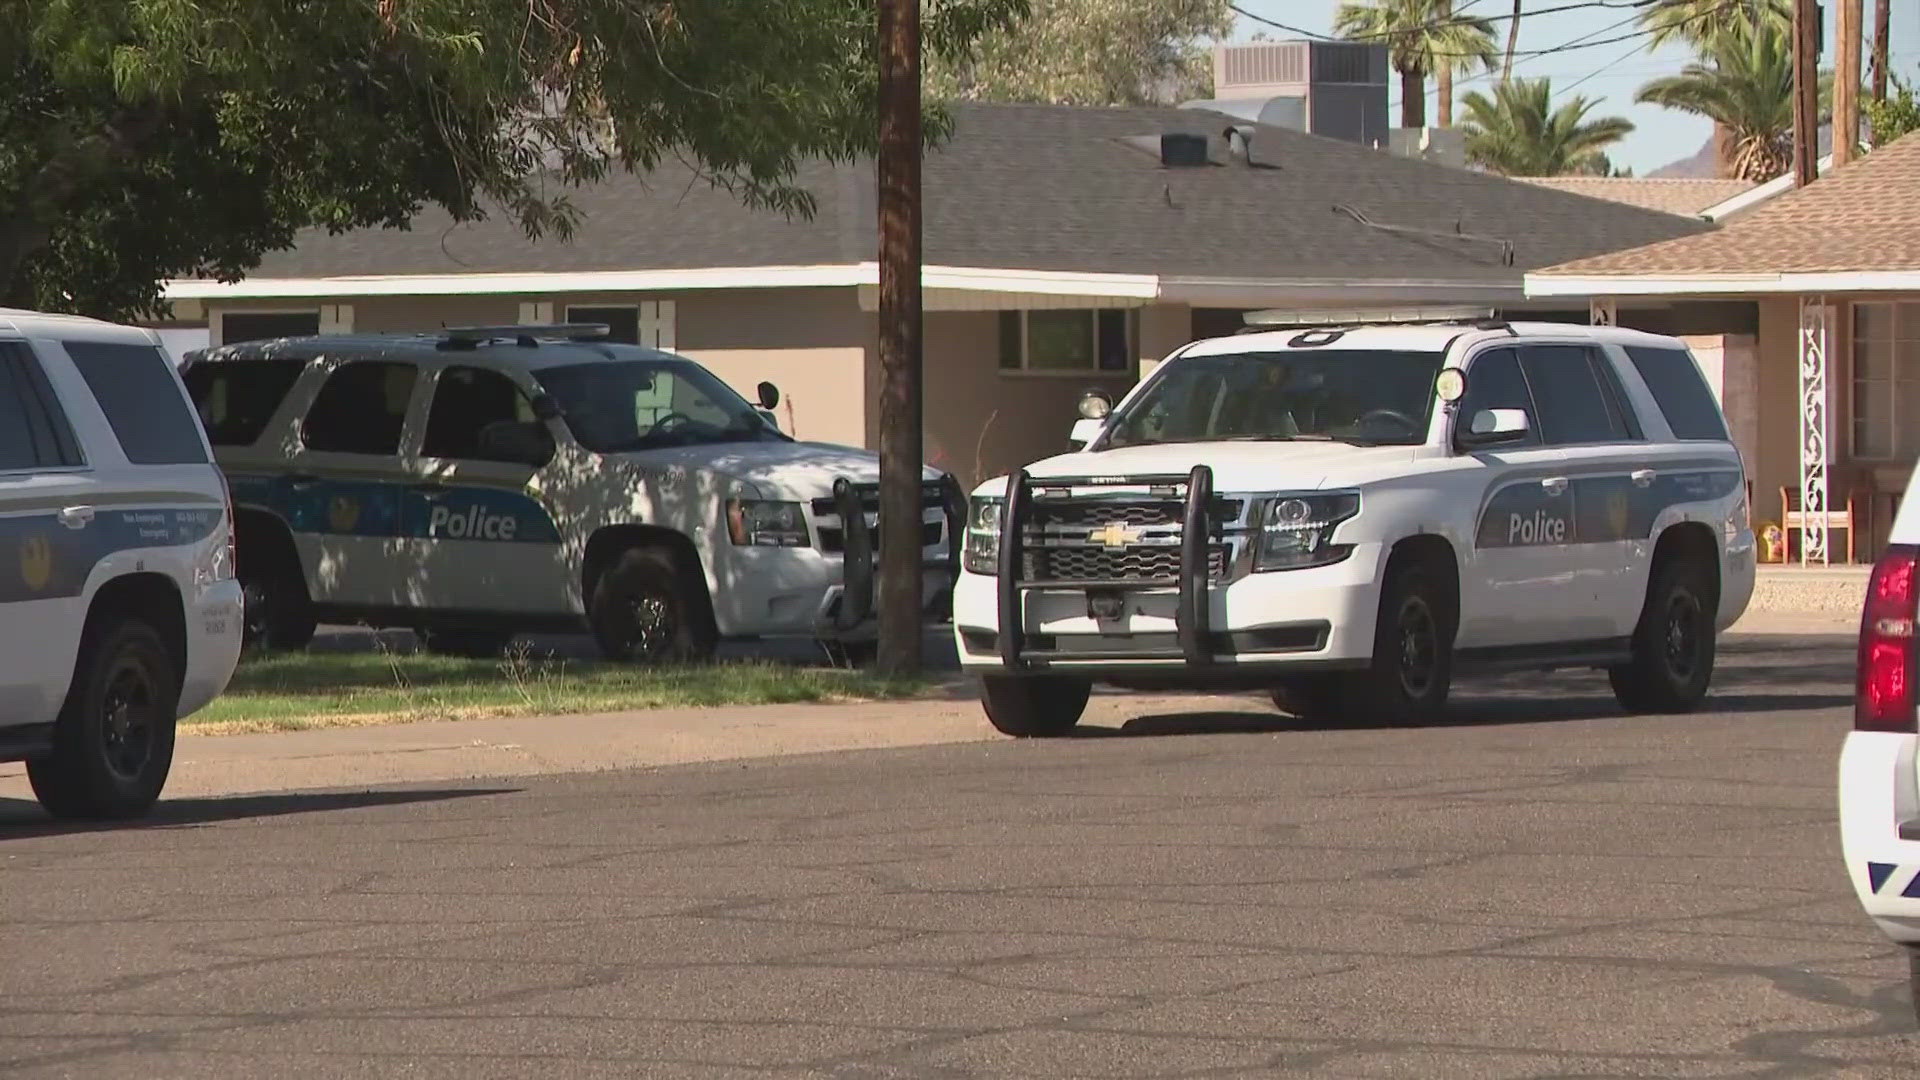 The Phoenix Fire Department said the child was found in a backyard pool Sunday afternoon near 19th Avenue and Osborn Road.